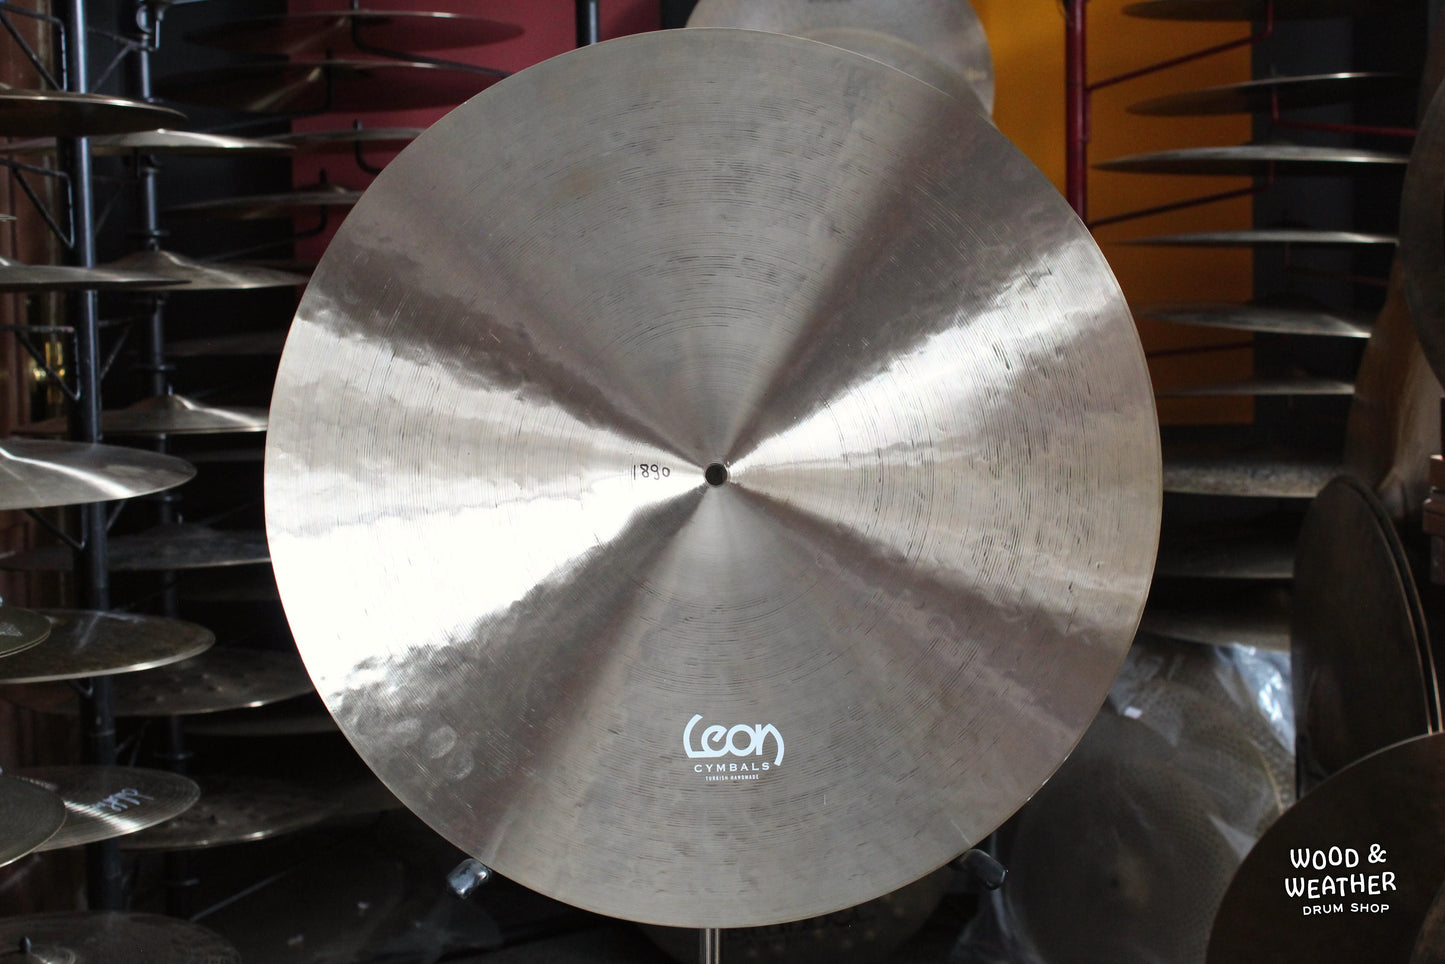 Leon Cymbals 21" Flat Bell Raw Lathed Ride Cymbal 1890g